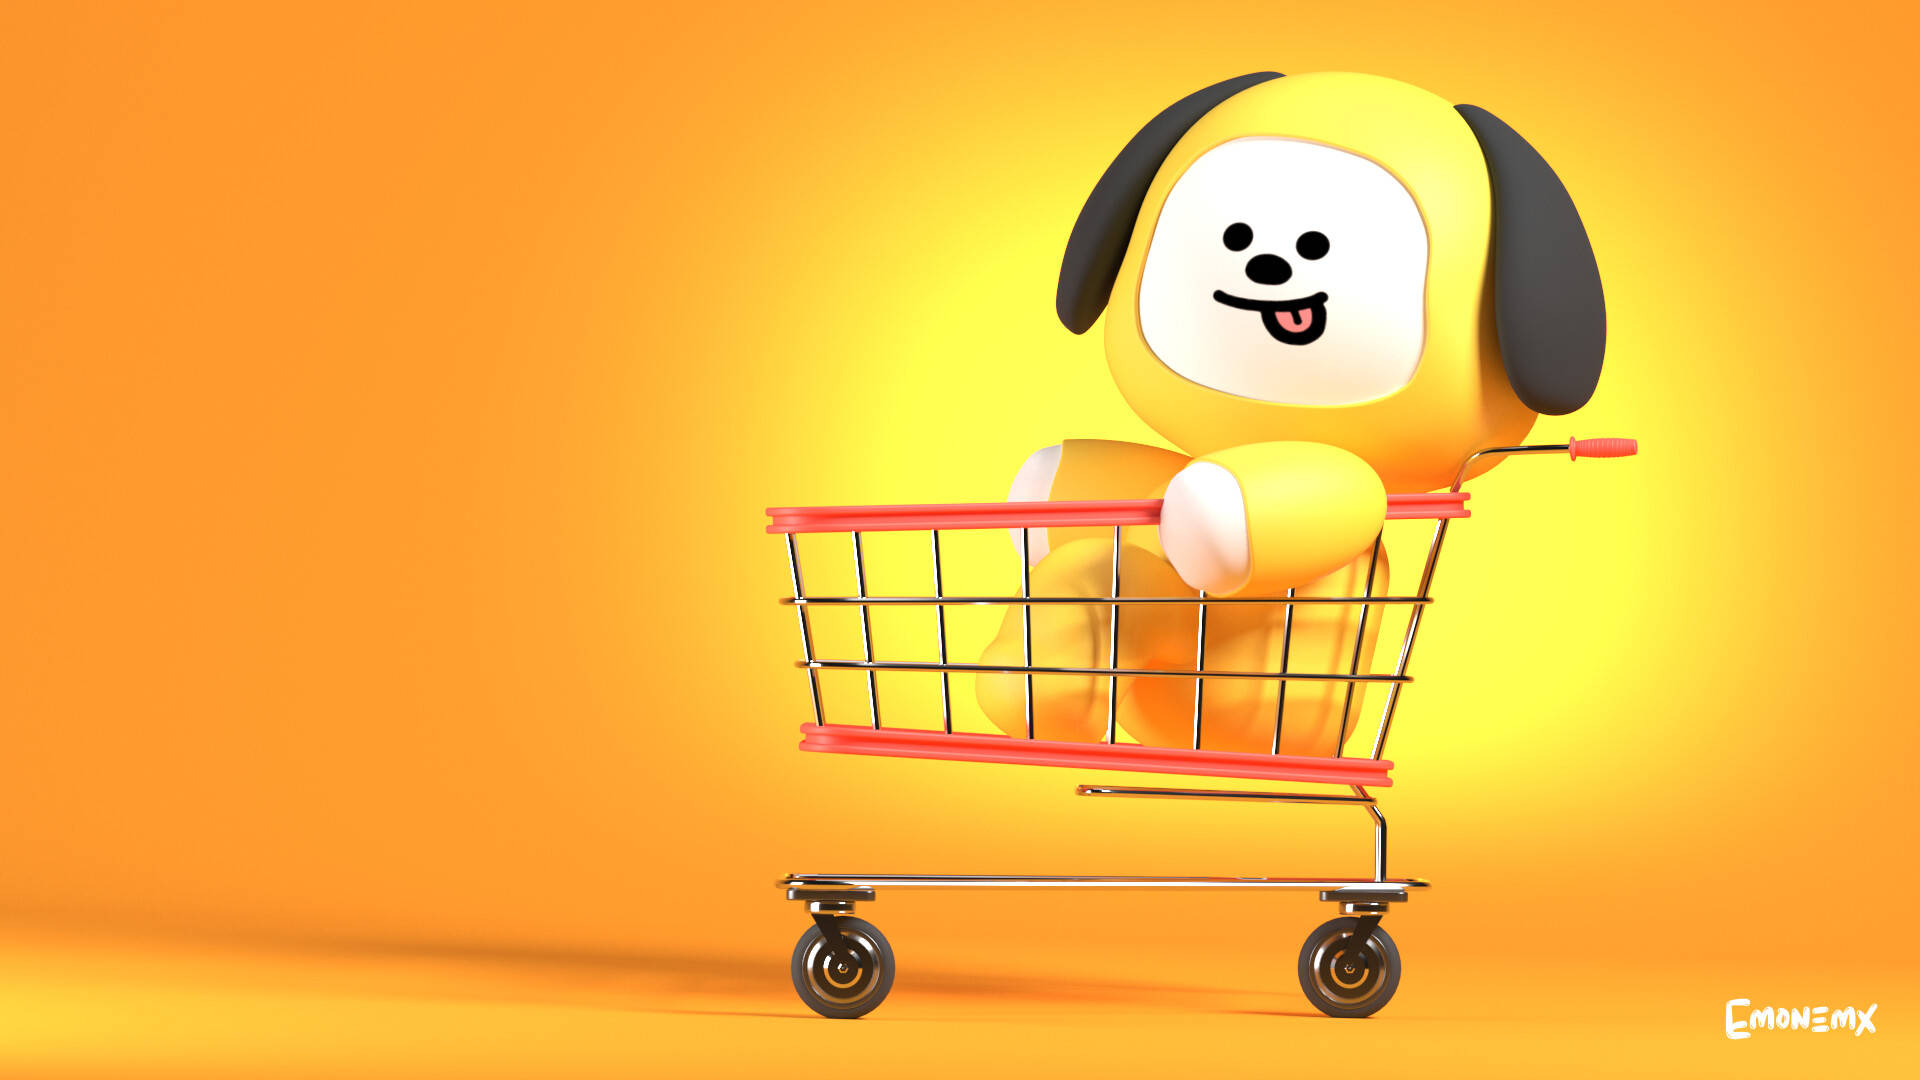 Adorable Chimmy Bt21 In A Playful Mood!